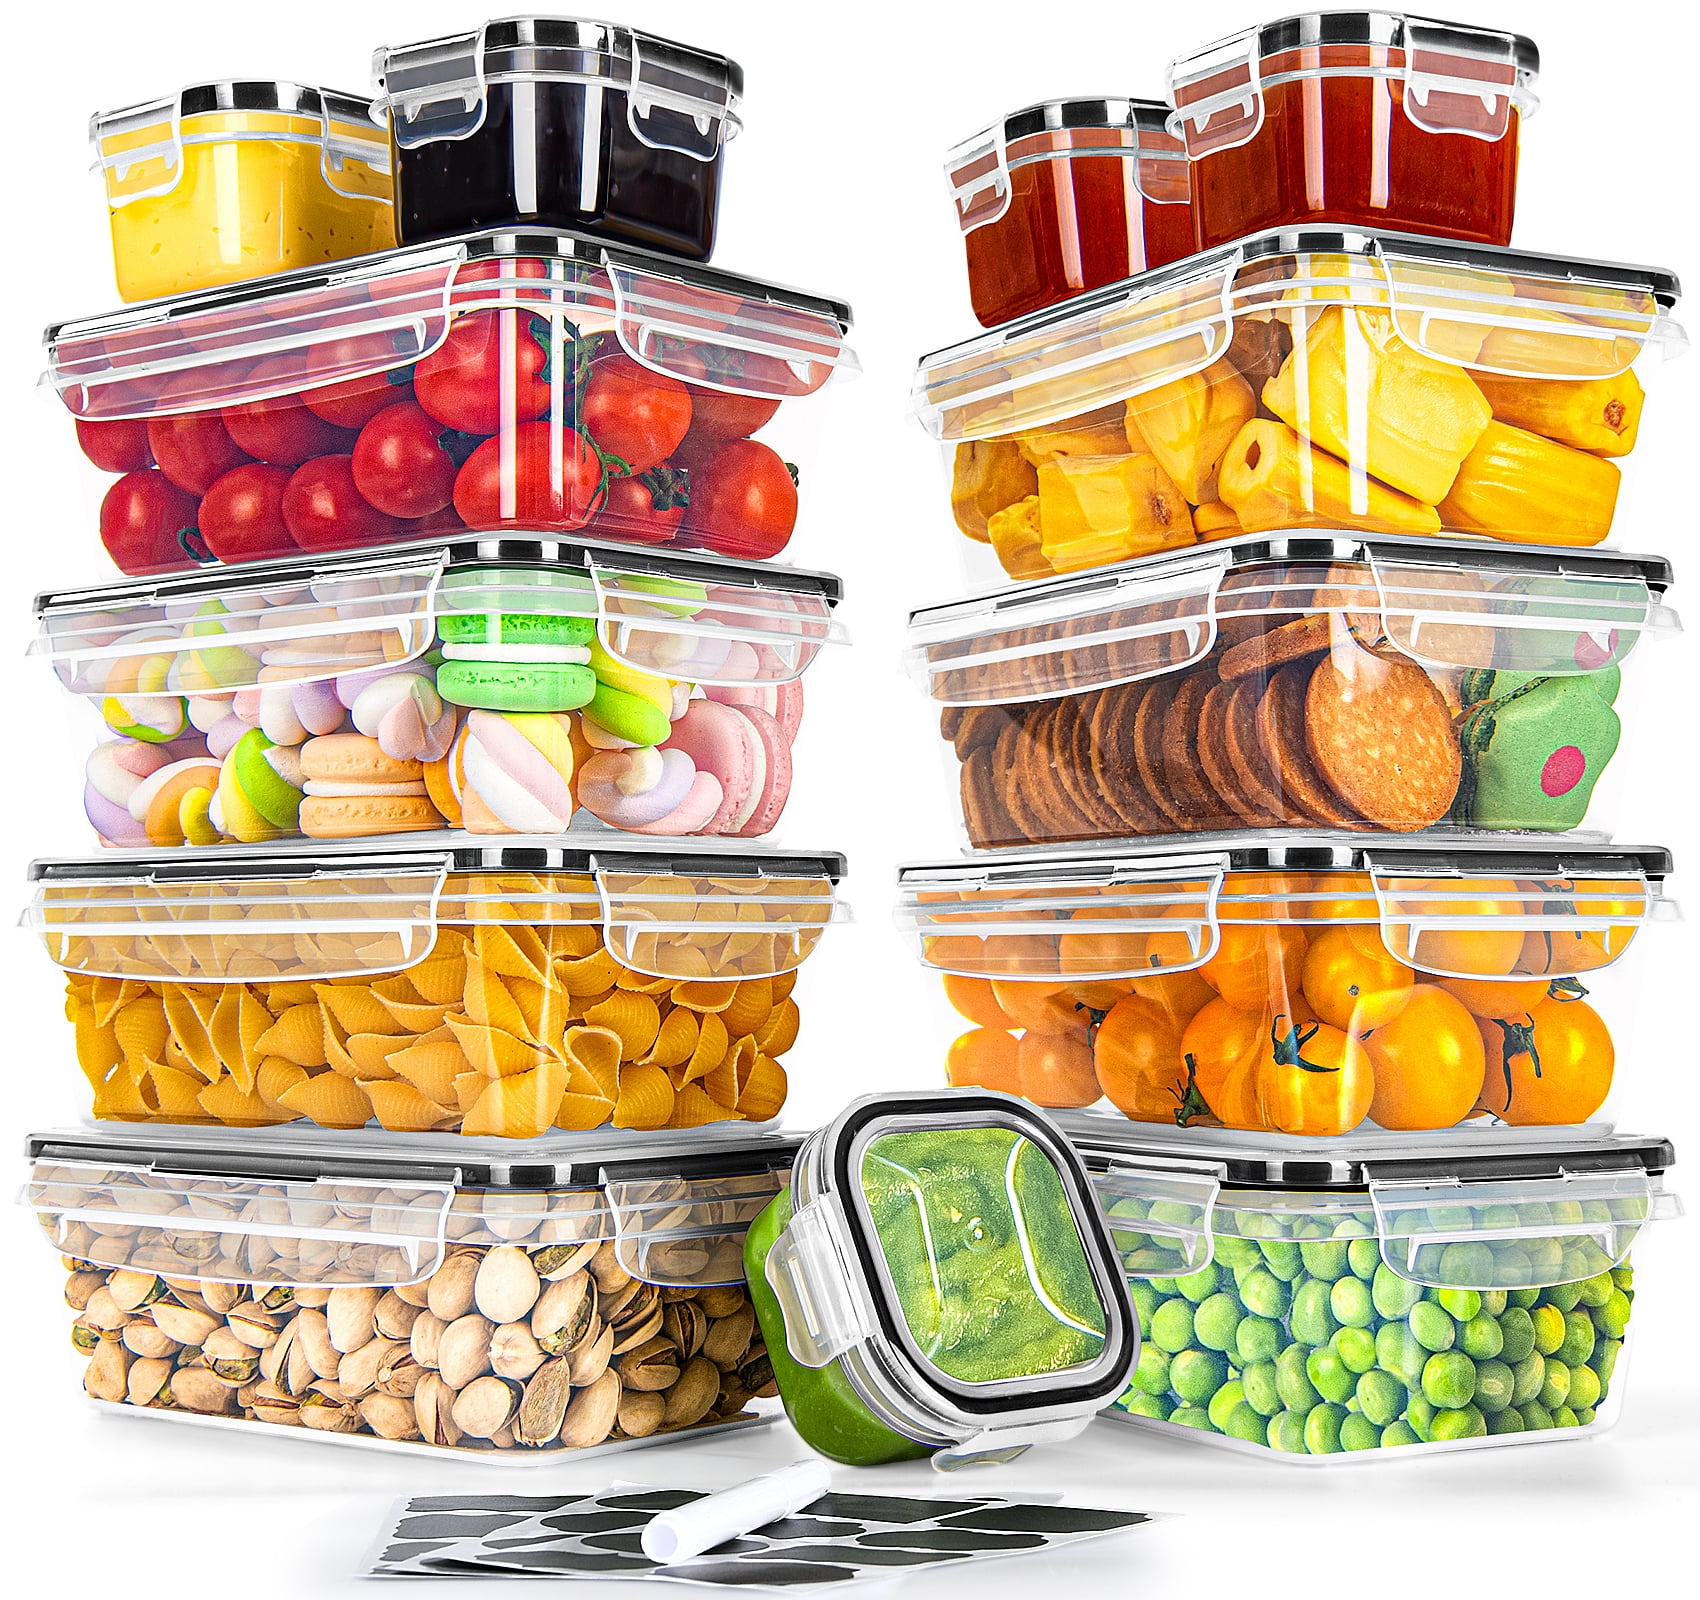 Glad® Food Storage Containers with Lids